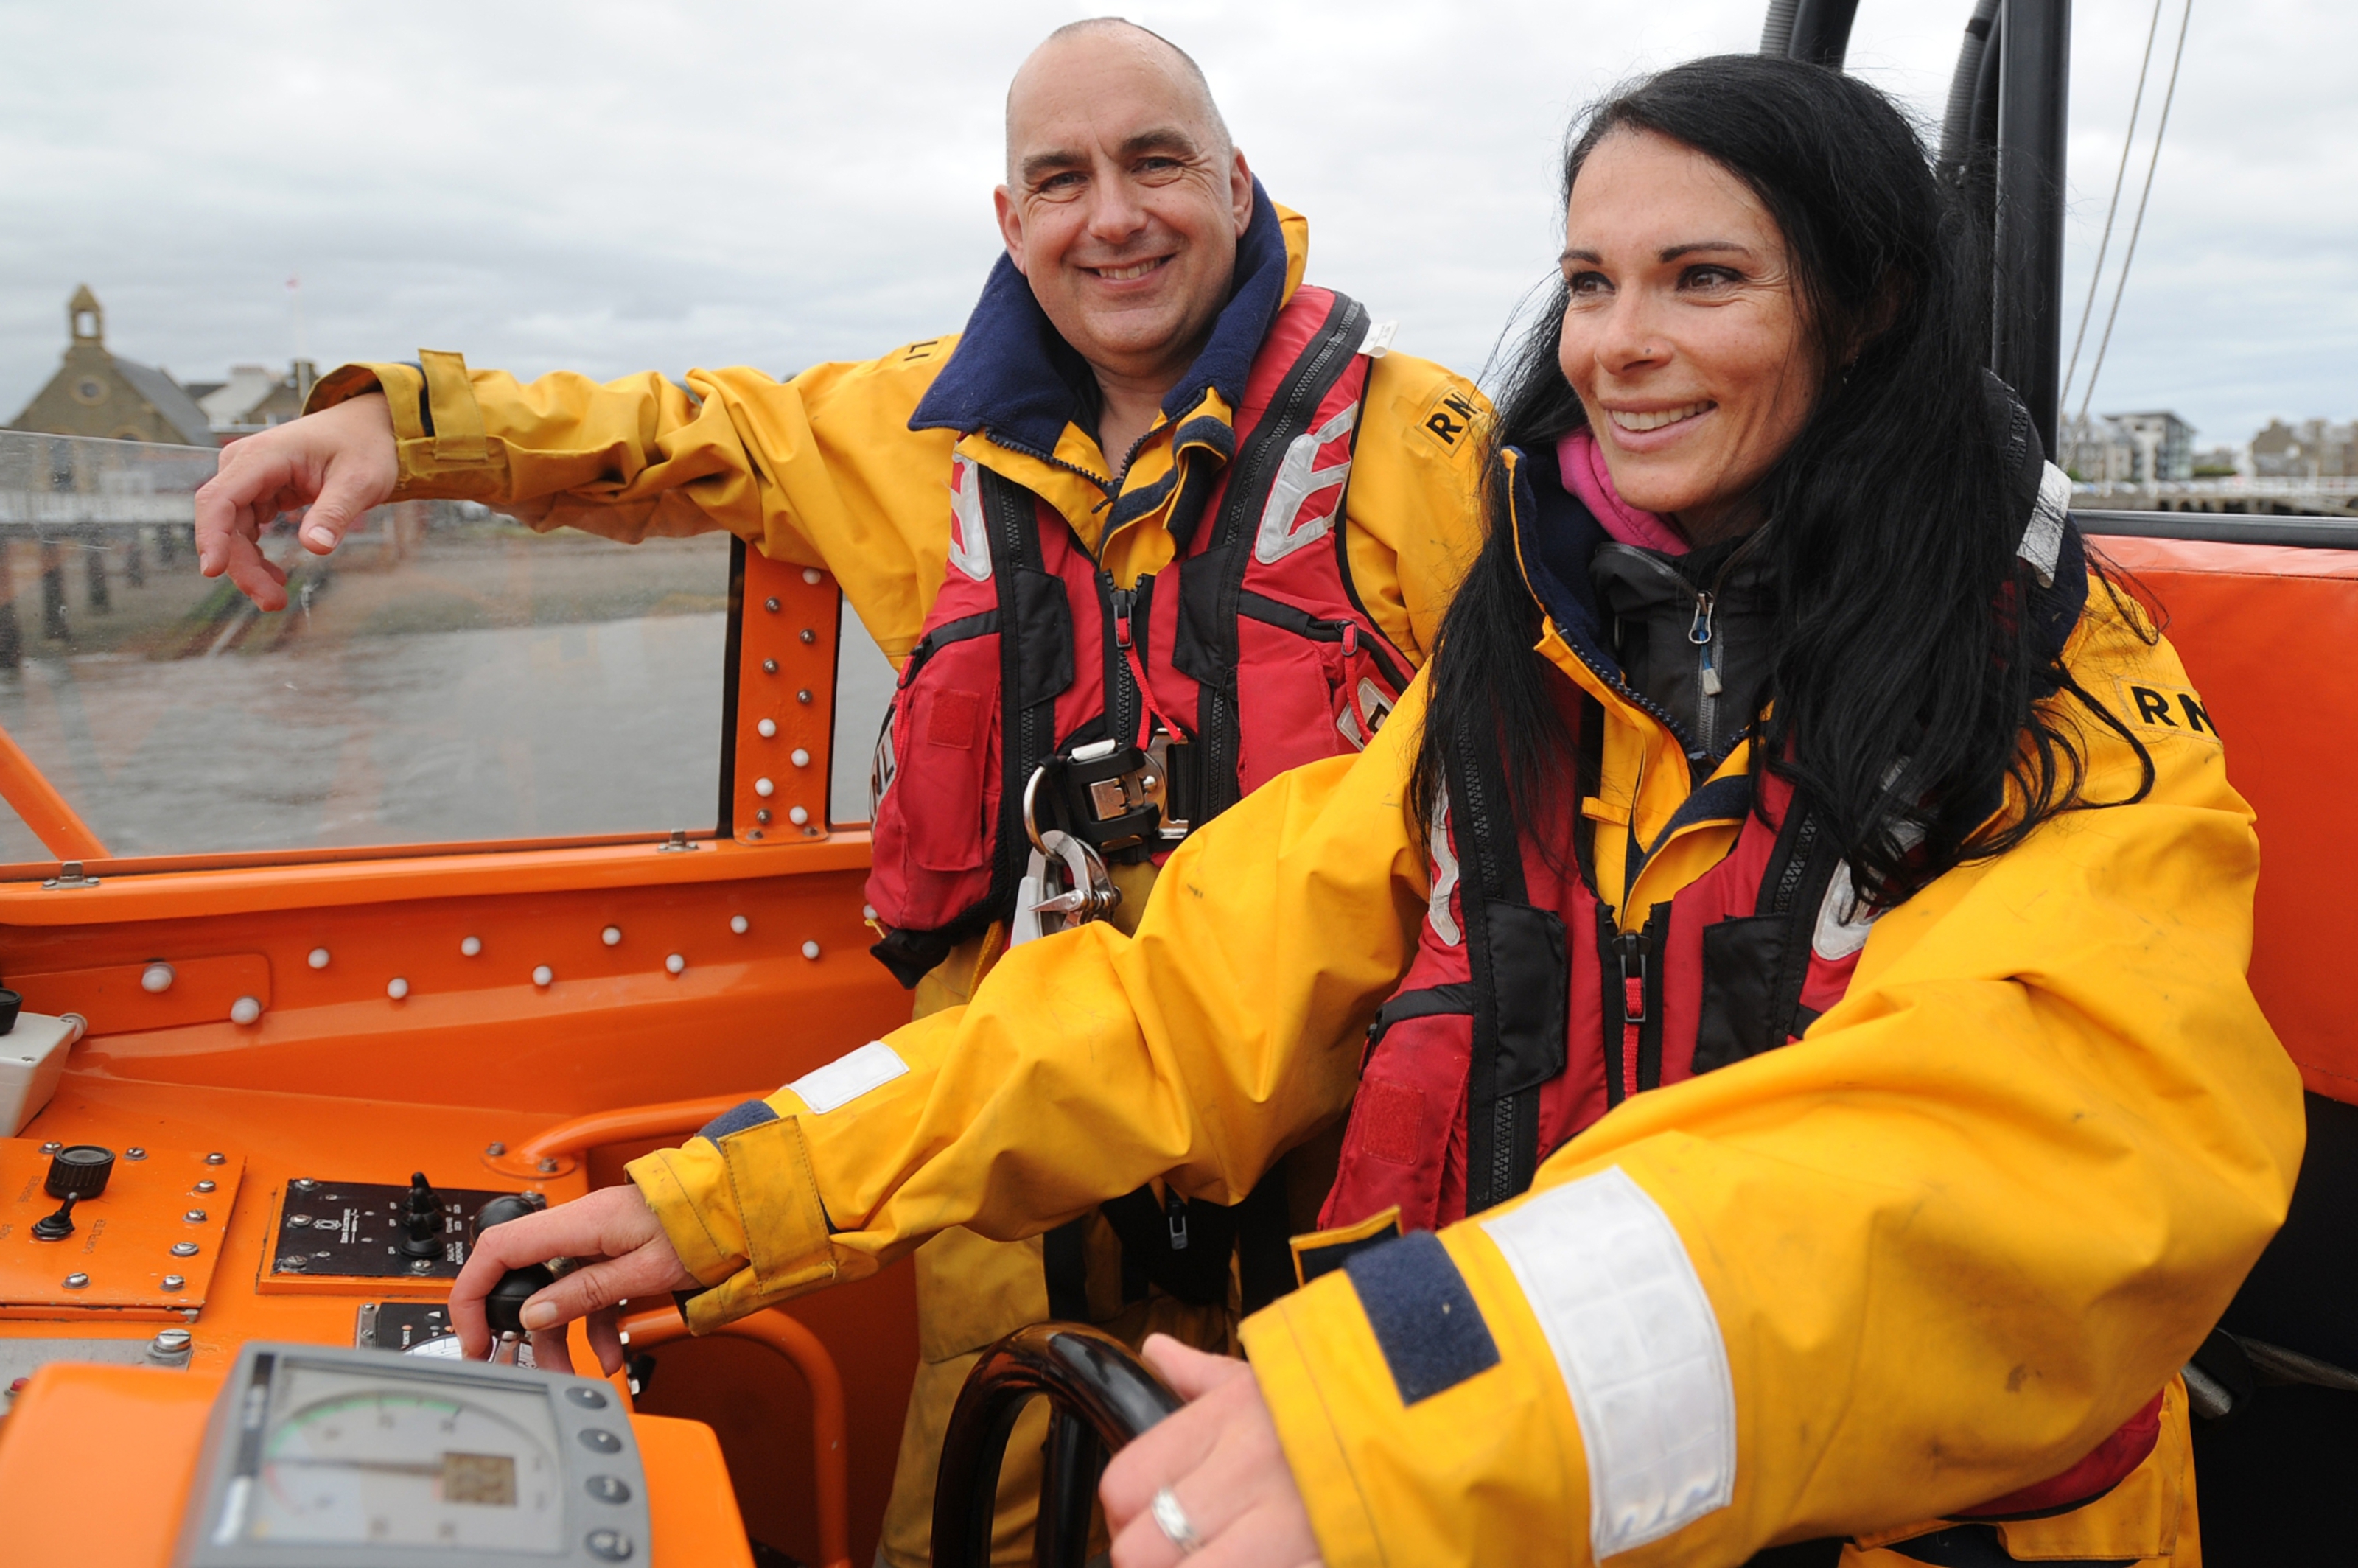 Broughty Ferry RNLI coxswain Murray Brown shows Gayle the ropes.